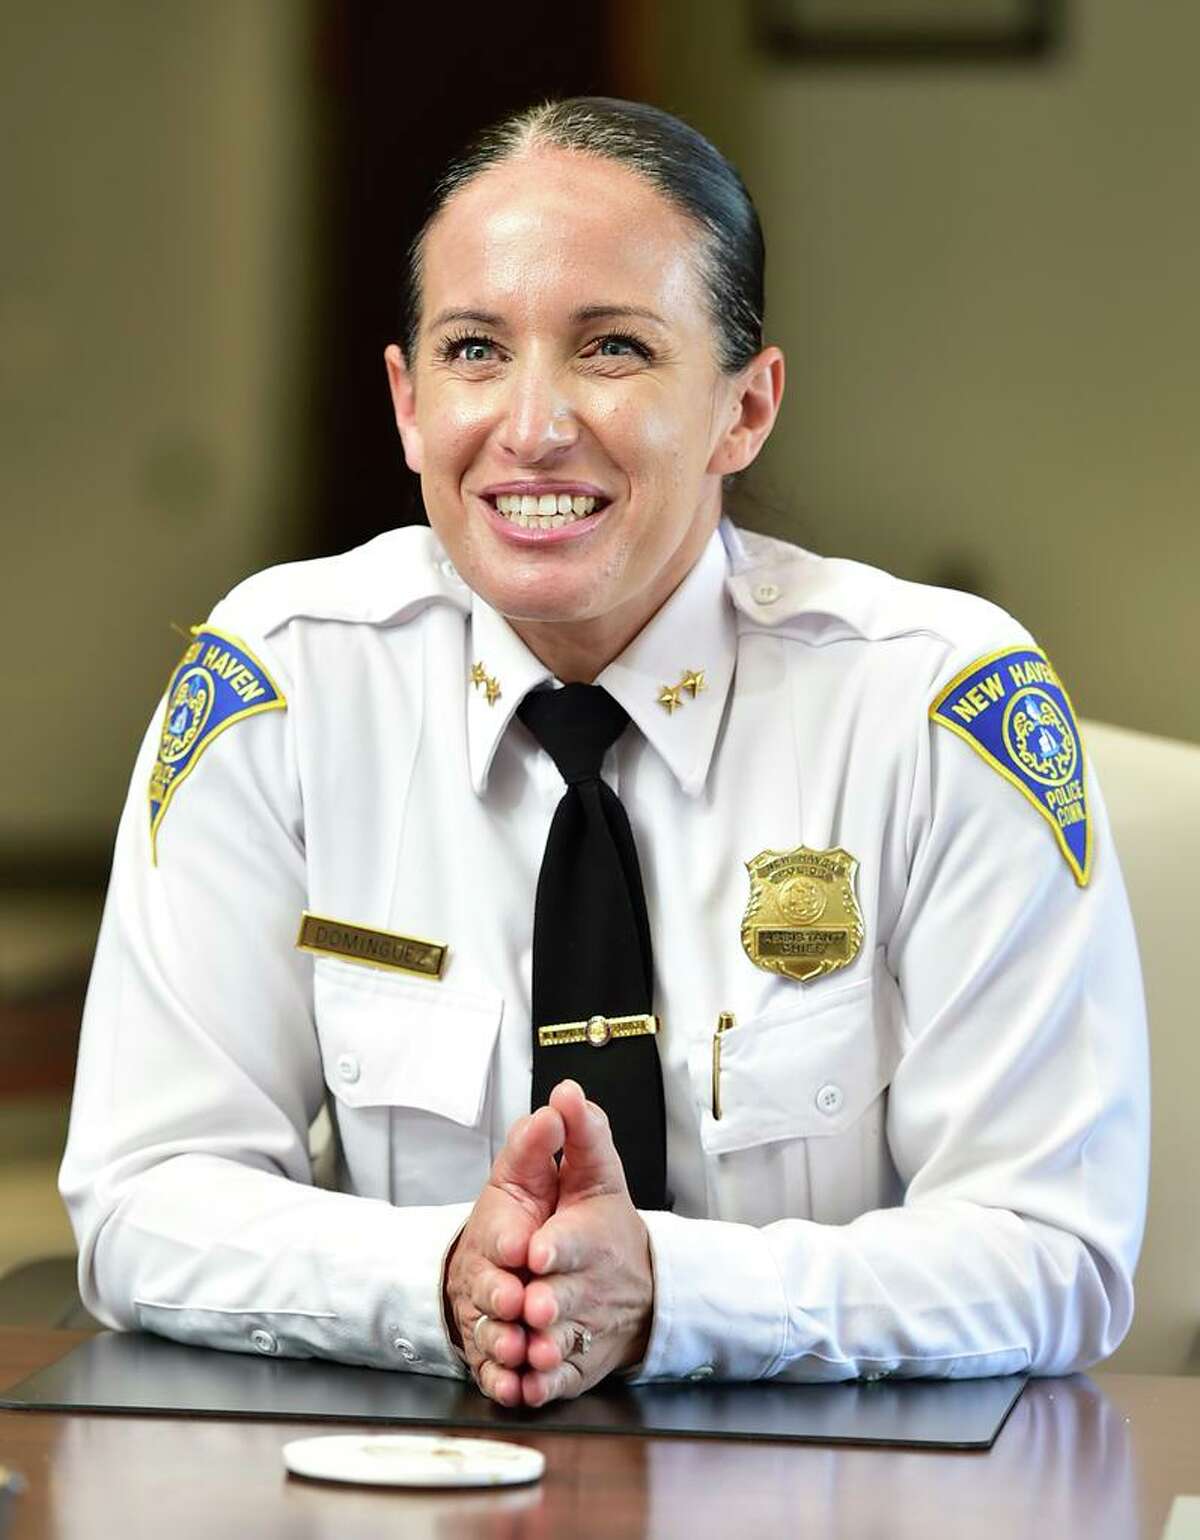 Acting New Haven Police Chief Renee Dominguez, March 2021.